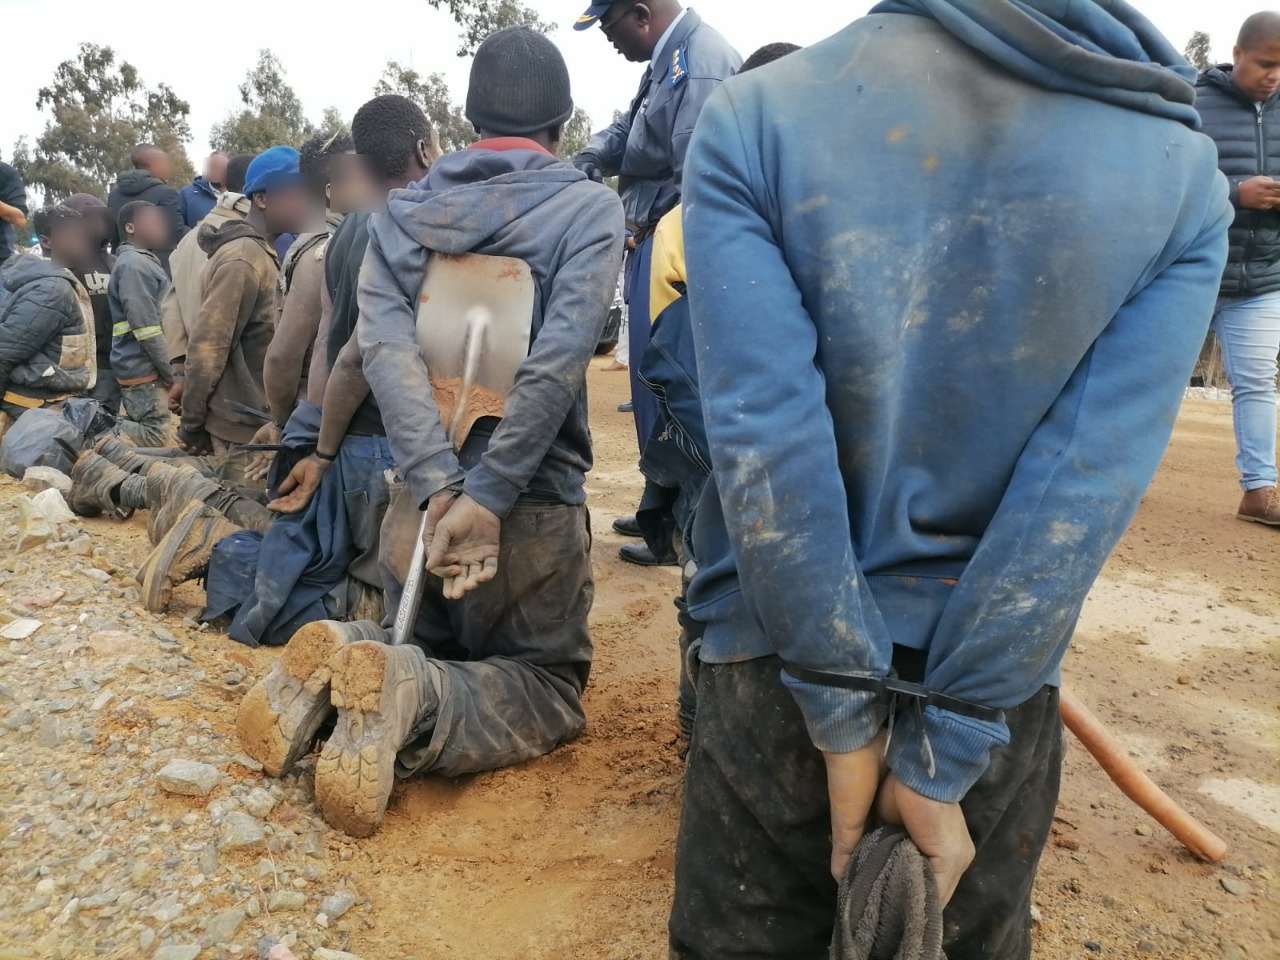 Hawks led multi-disciplinary operations, arrest 46 illegal miners, one fatally wounded in West Rand